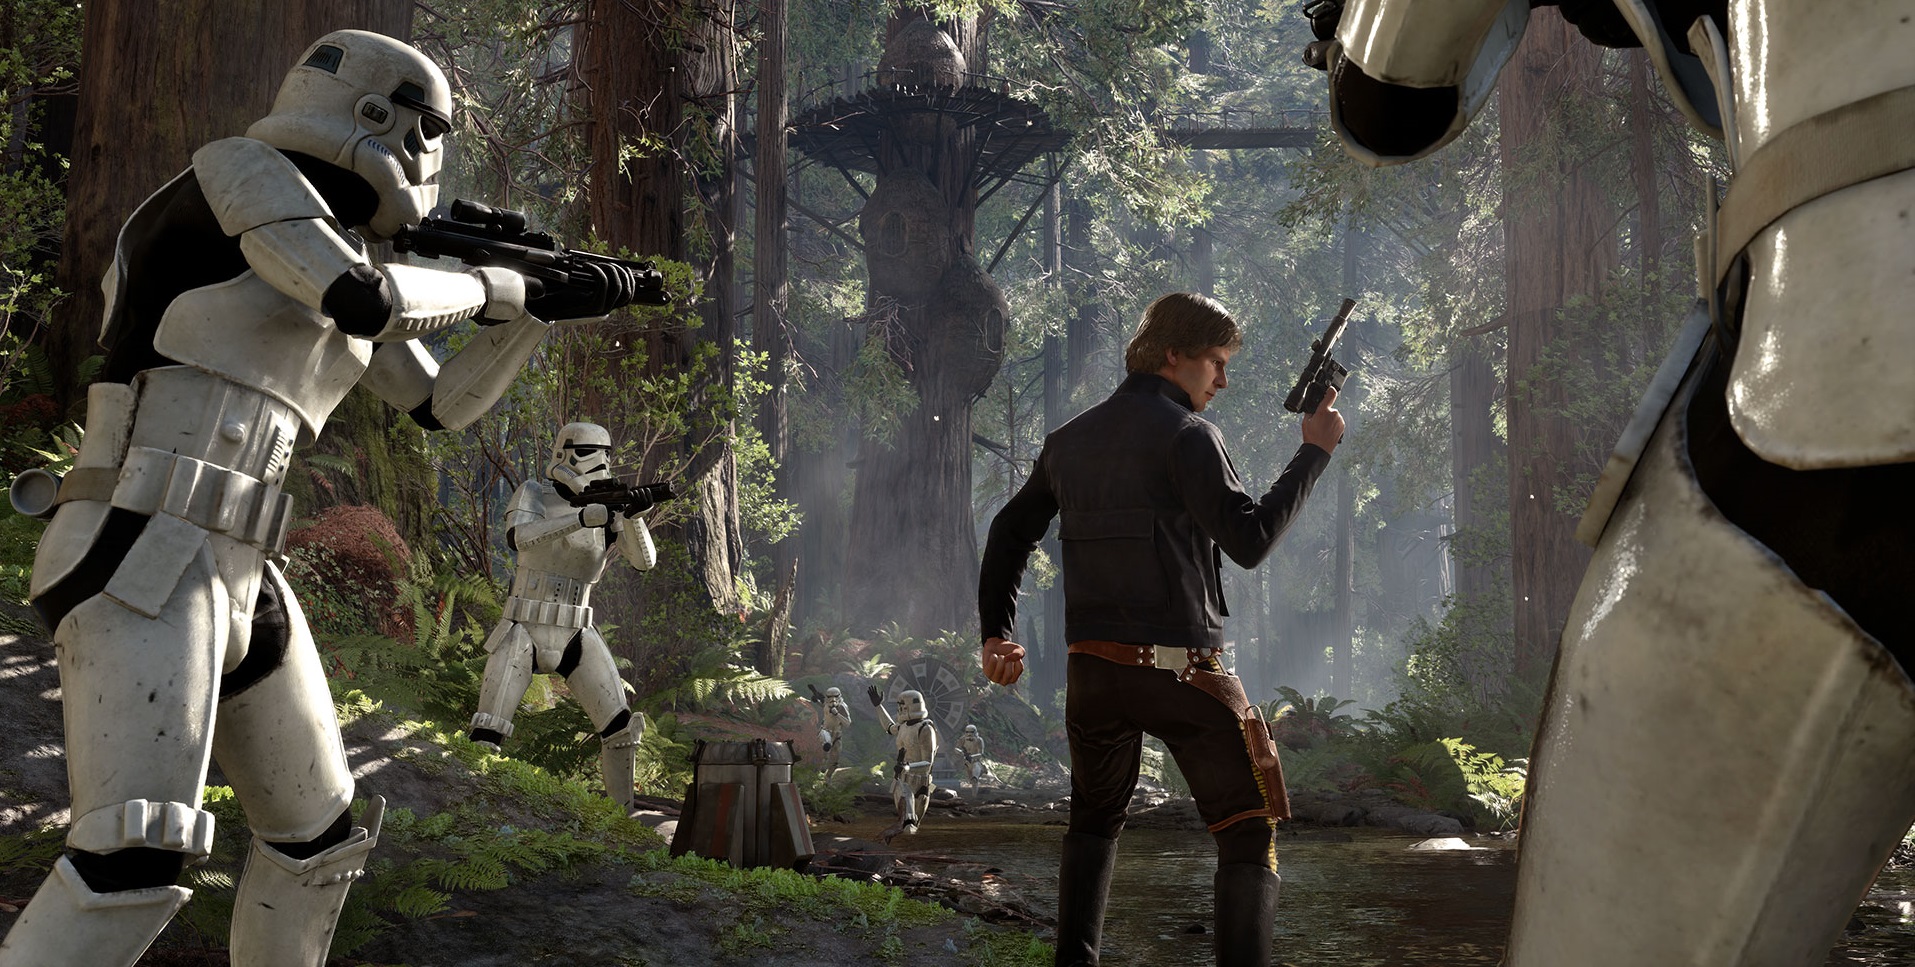 Star Wars: Battlefront - Here's What Han, Leia, And The Emperor Look Like In Game